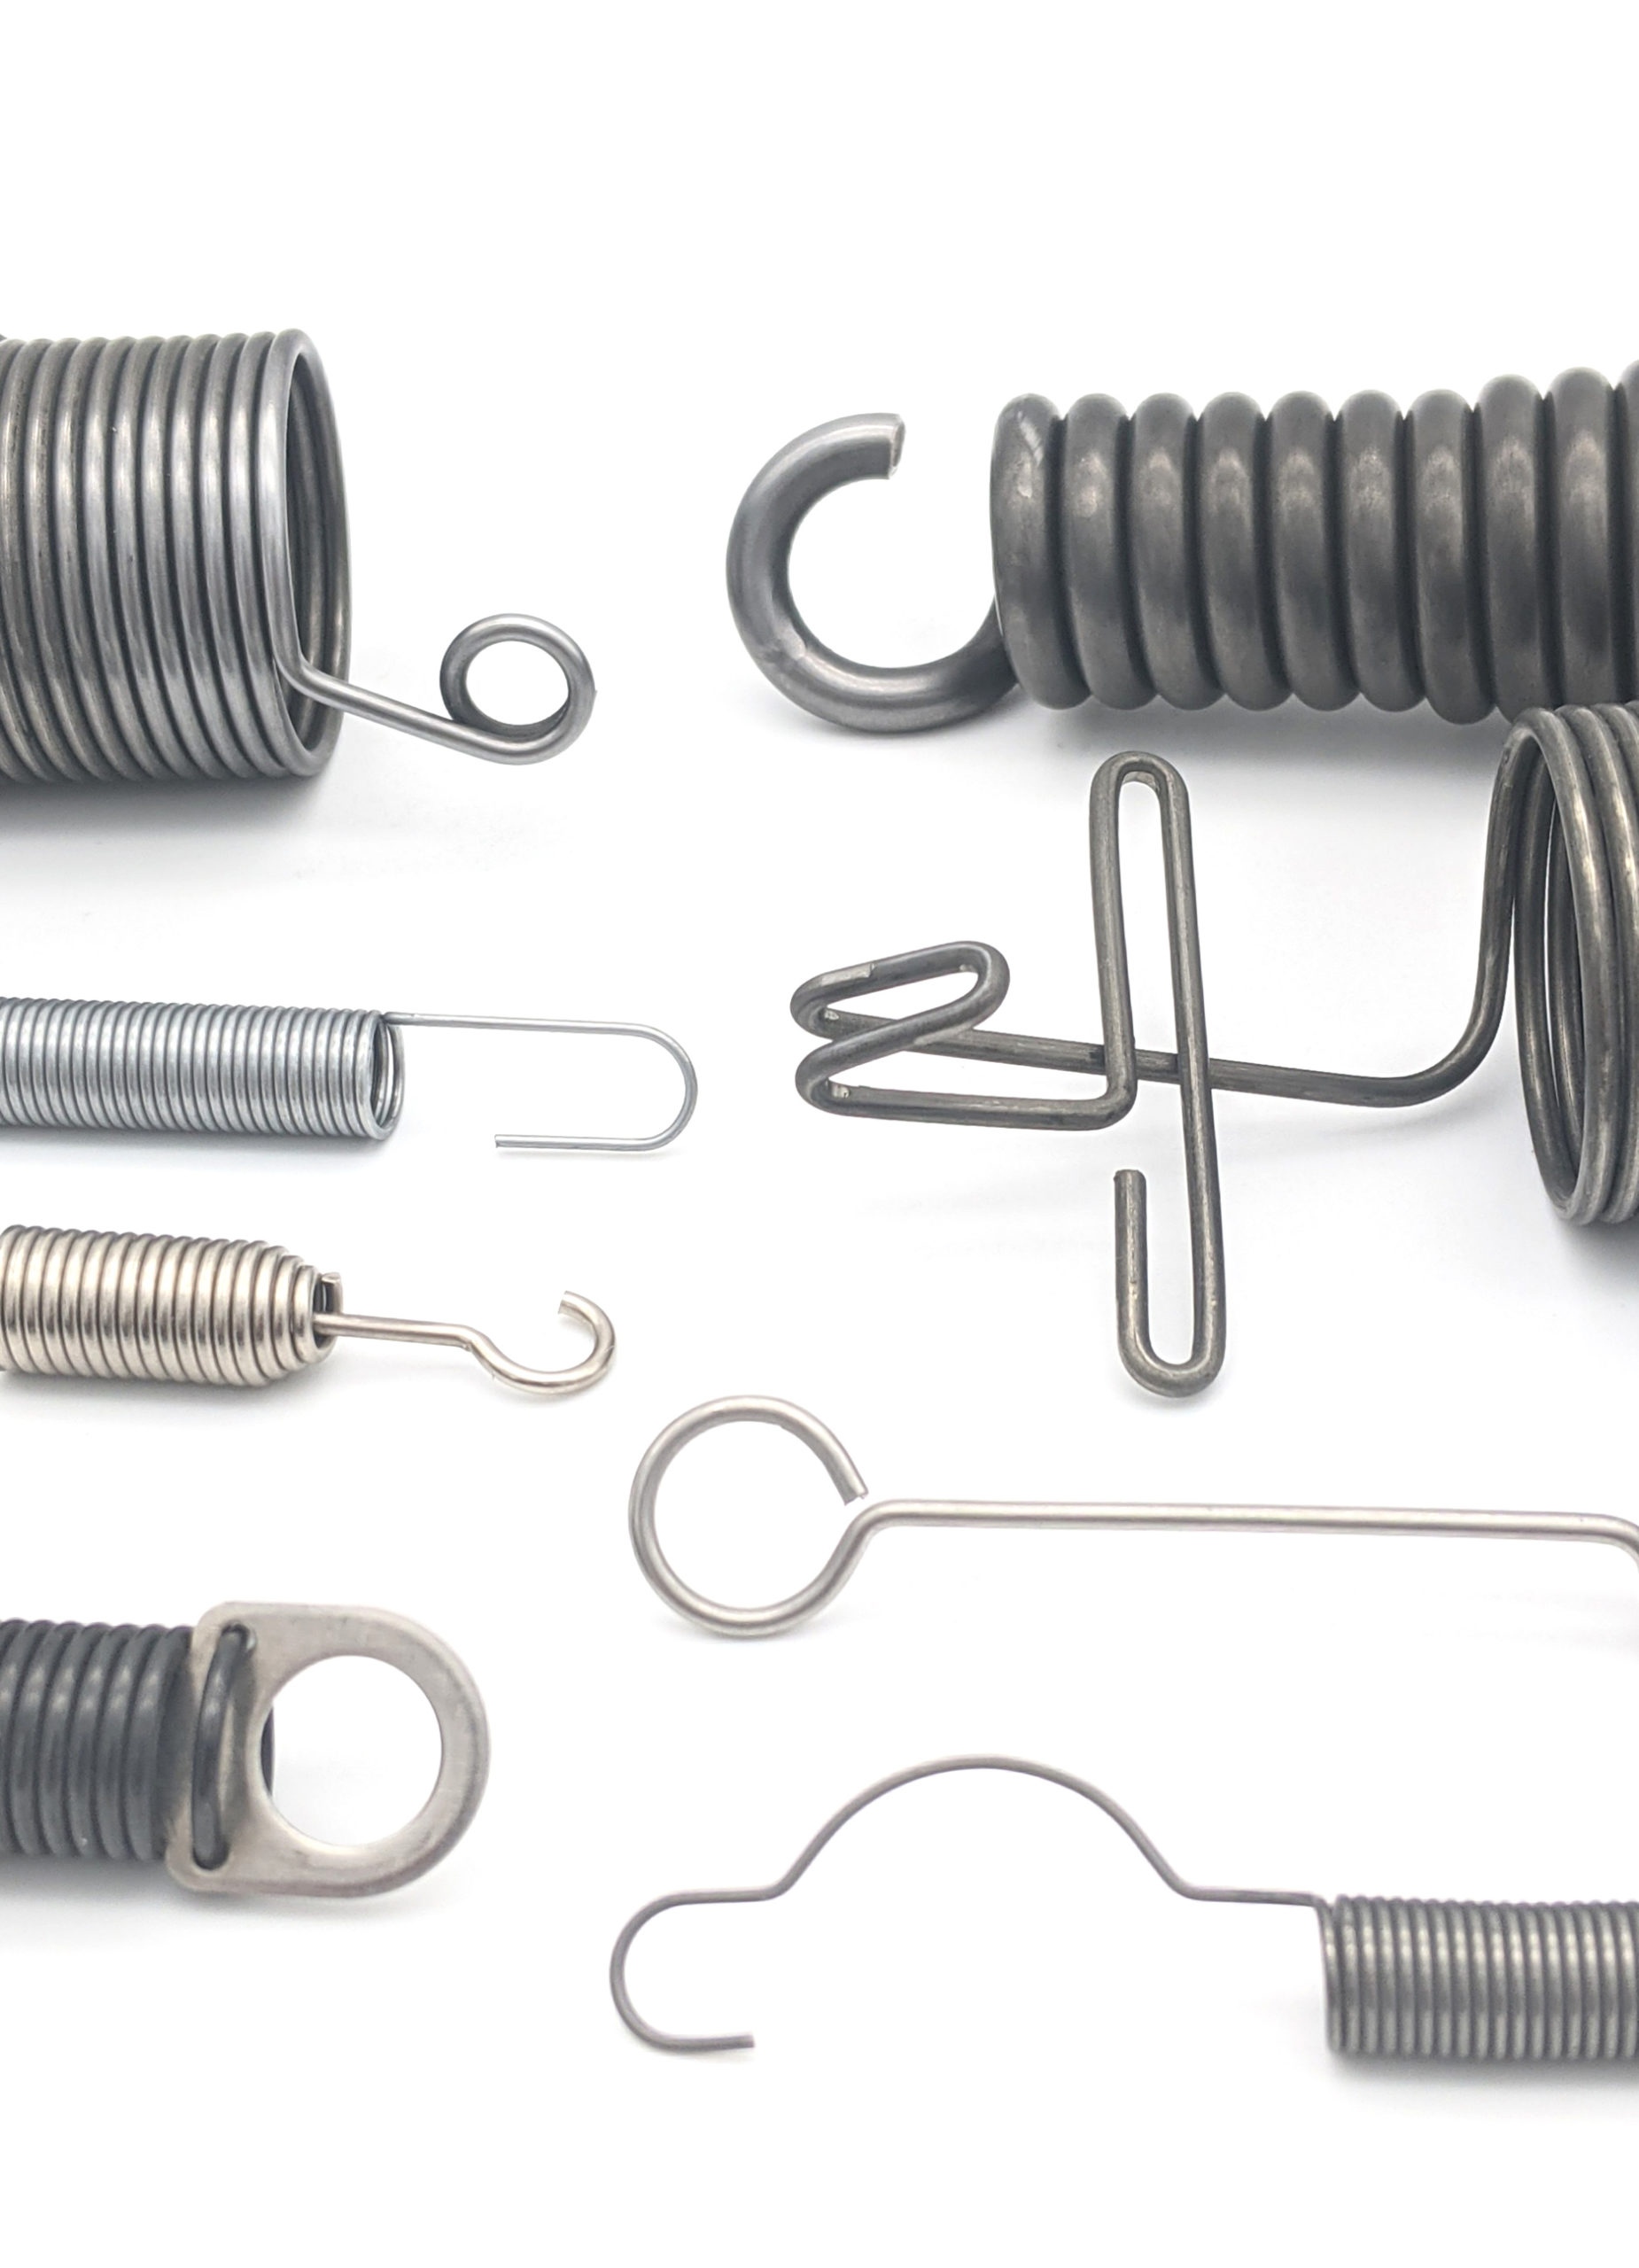 1-1.5mm Hook Expansion Extension Expanding Extending Tension Springs Spring Stee 